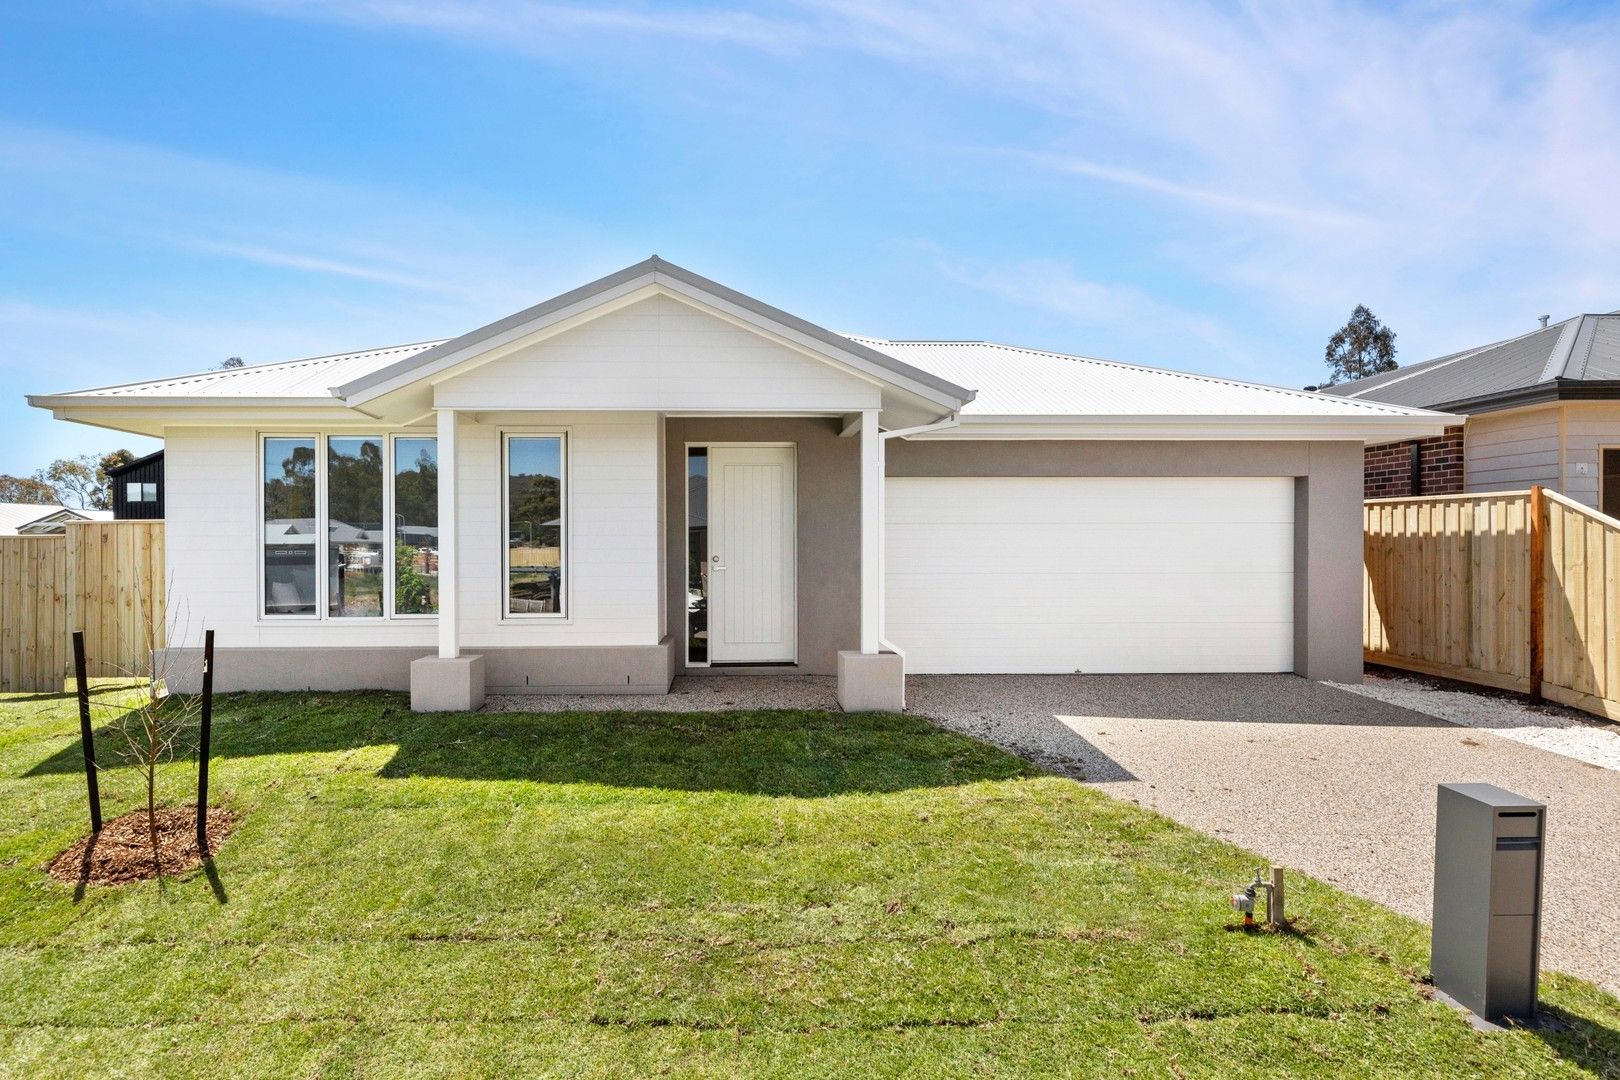 4 bedrooms House in 23 Snell Dr GISBORNE VIC, 3437